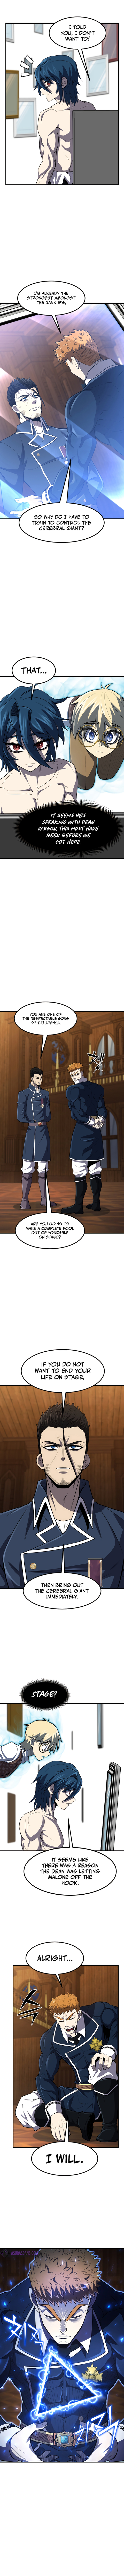 Standard of Reincarnation Chapter 34 page 6